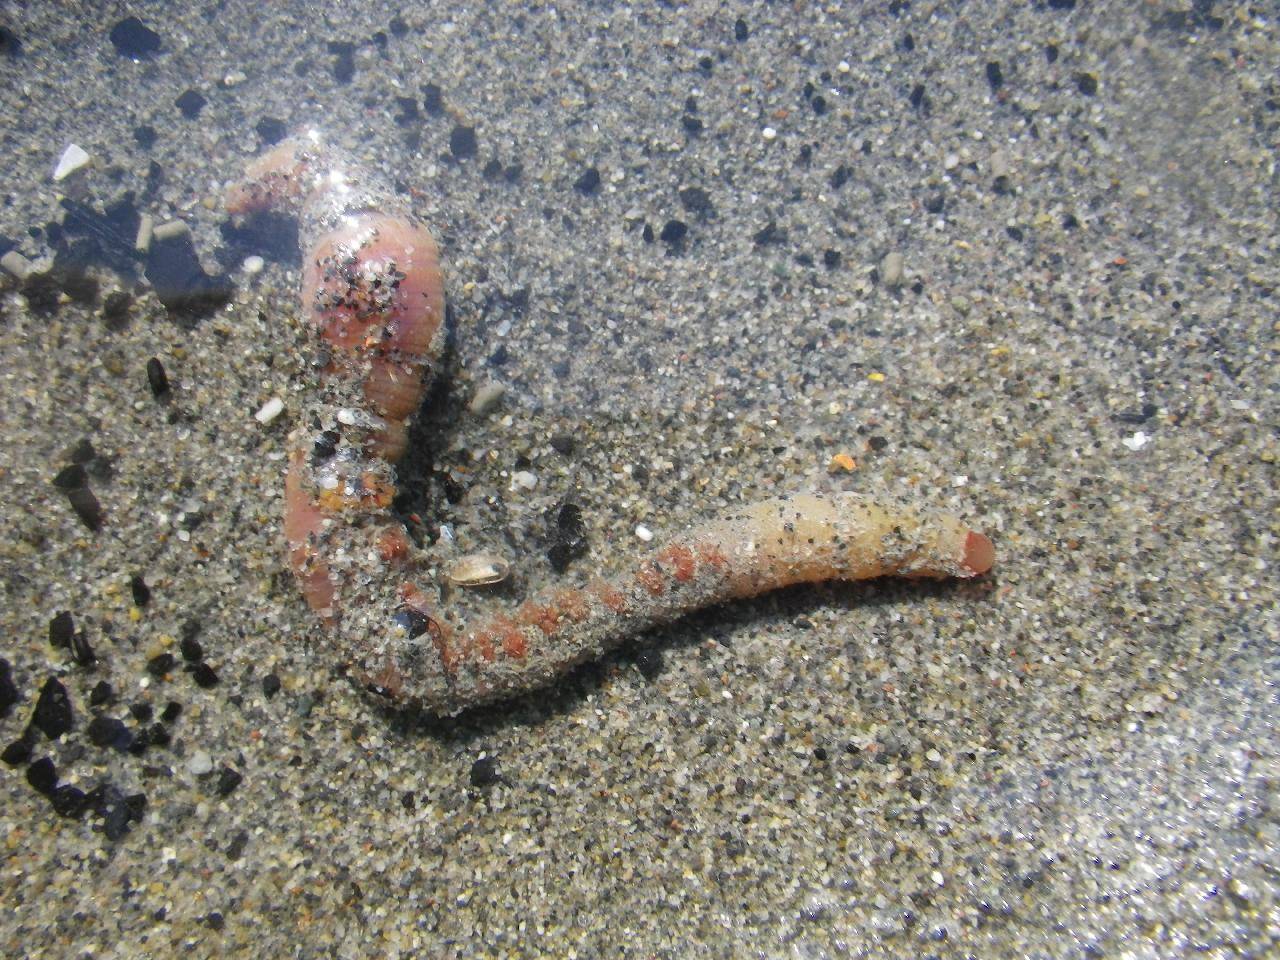 A lugworm (Abarenicola pacifica) lies on sand, partially covered with sand grains. (Courtesy Photo / Aaron Baldwin)